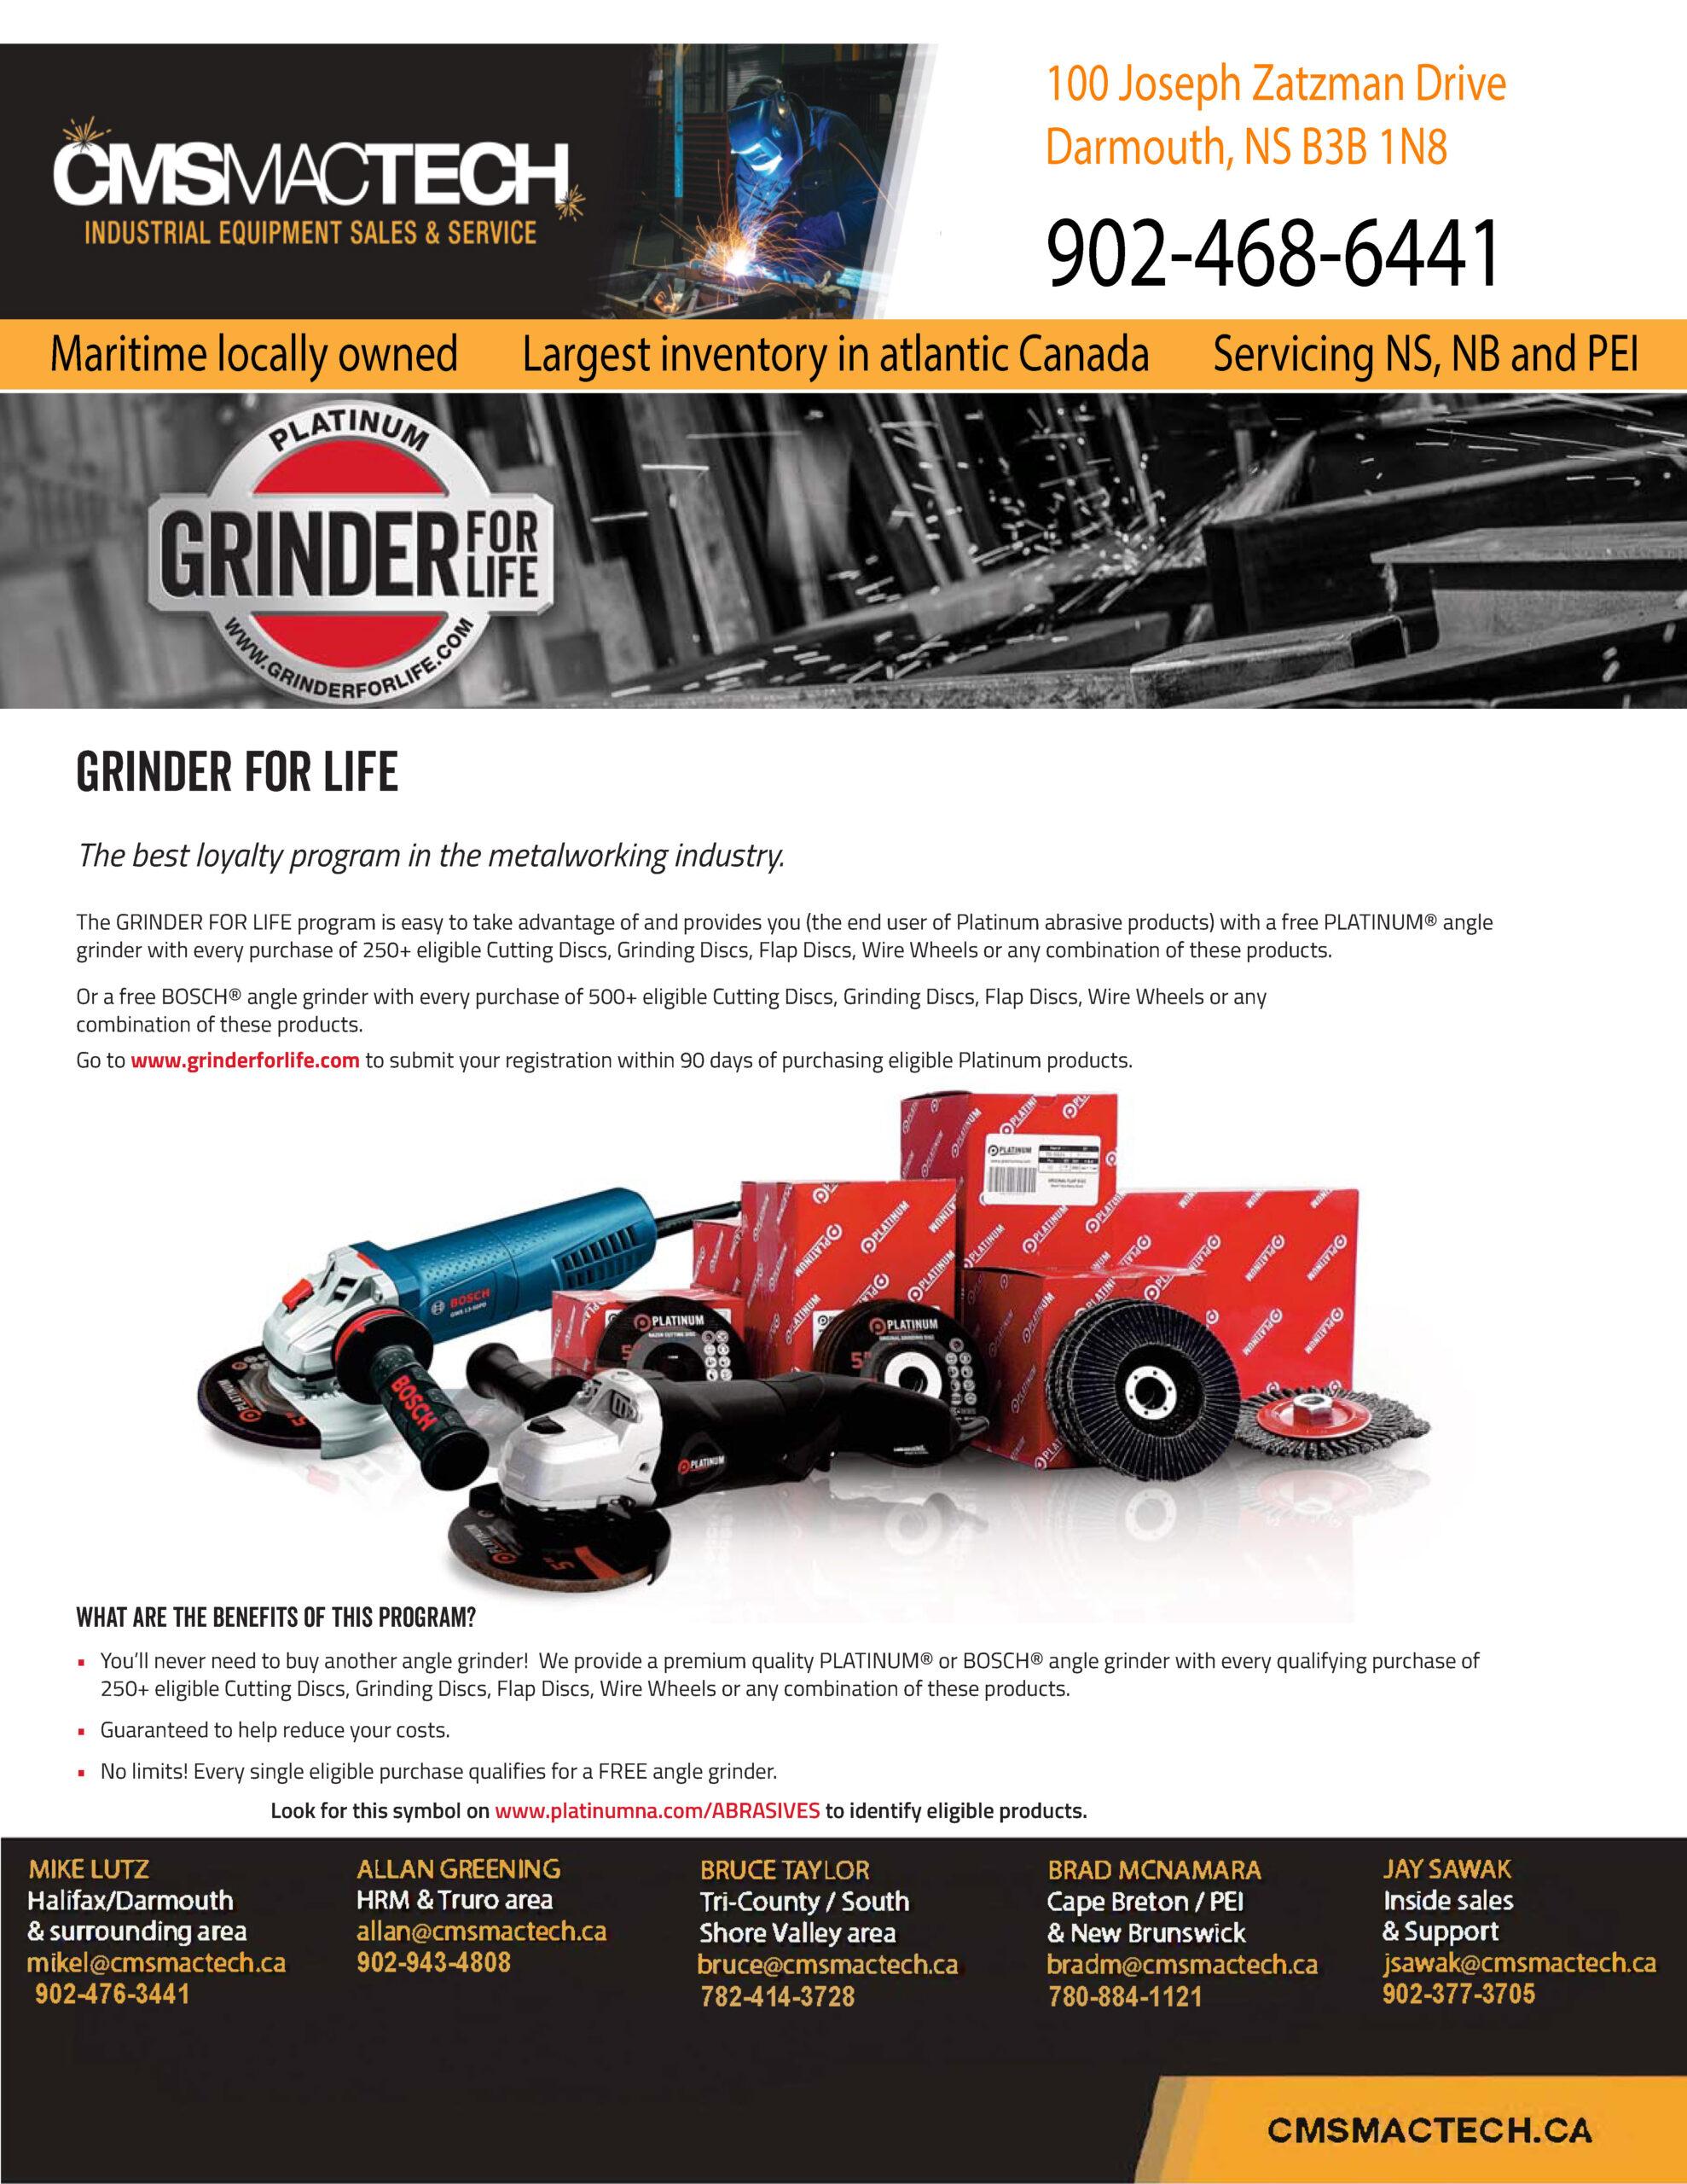 Grinder for Life Promotion from Platinum North America